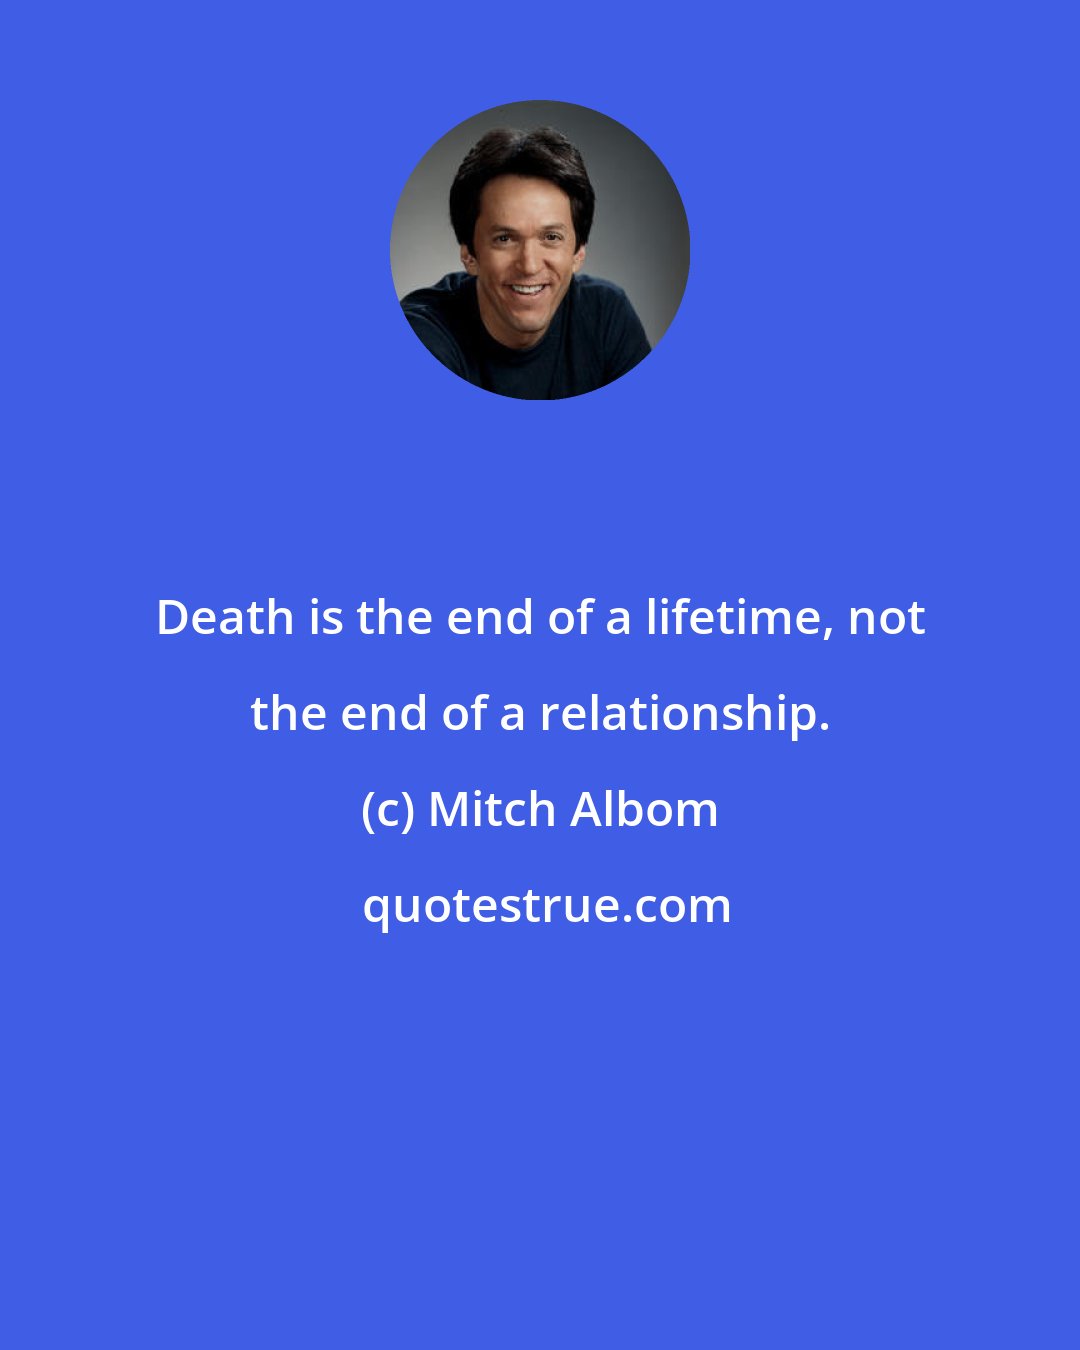 Mitch Albom: Death is the end of a lifetime, not the end of a relationship.